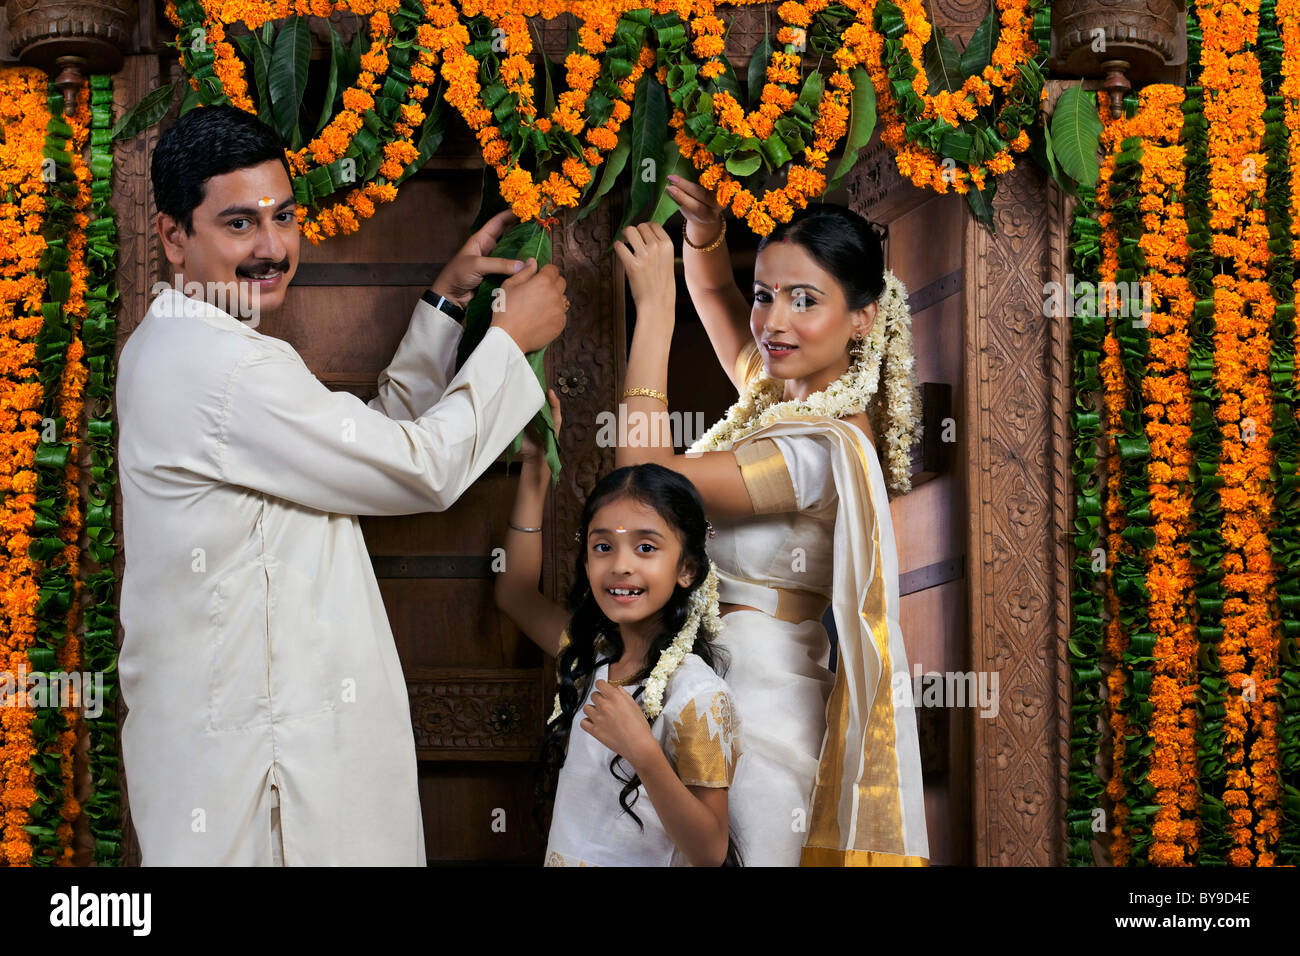 South Indian family decorating during Onam festival Stock Photo